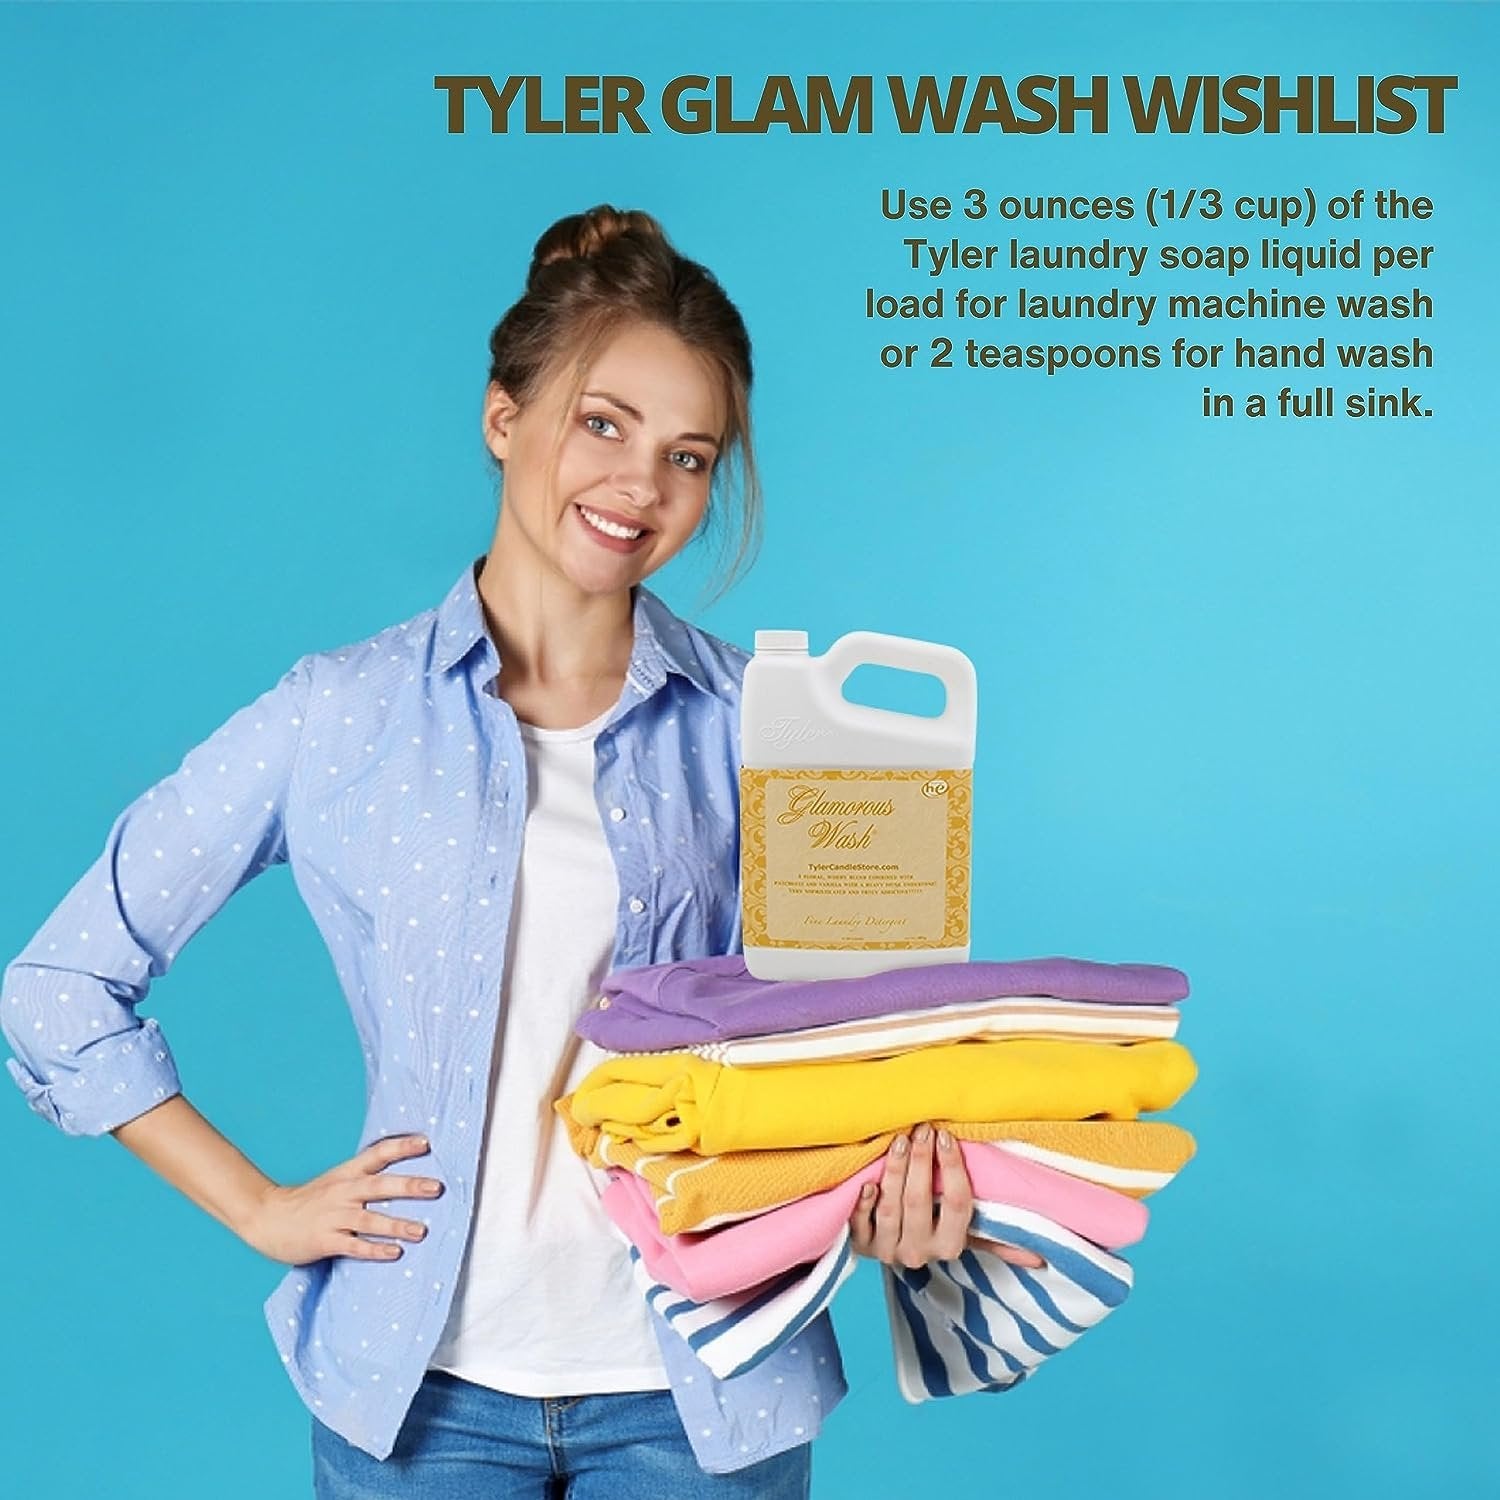 Worldwide Nutrition Bundle, 2 Items: Tyler Glamorous Wash Wishlist Scent Fine Laundry Liquid Detergent - Hand and Machine Washable - 1.89L (64 Fl Oz) Container and Multi-Purpose Key Chain